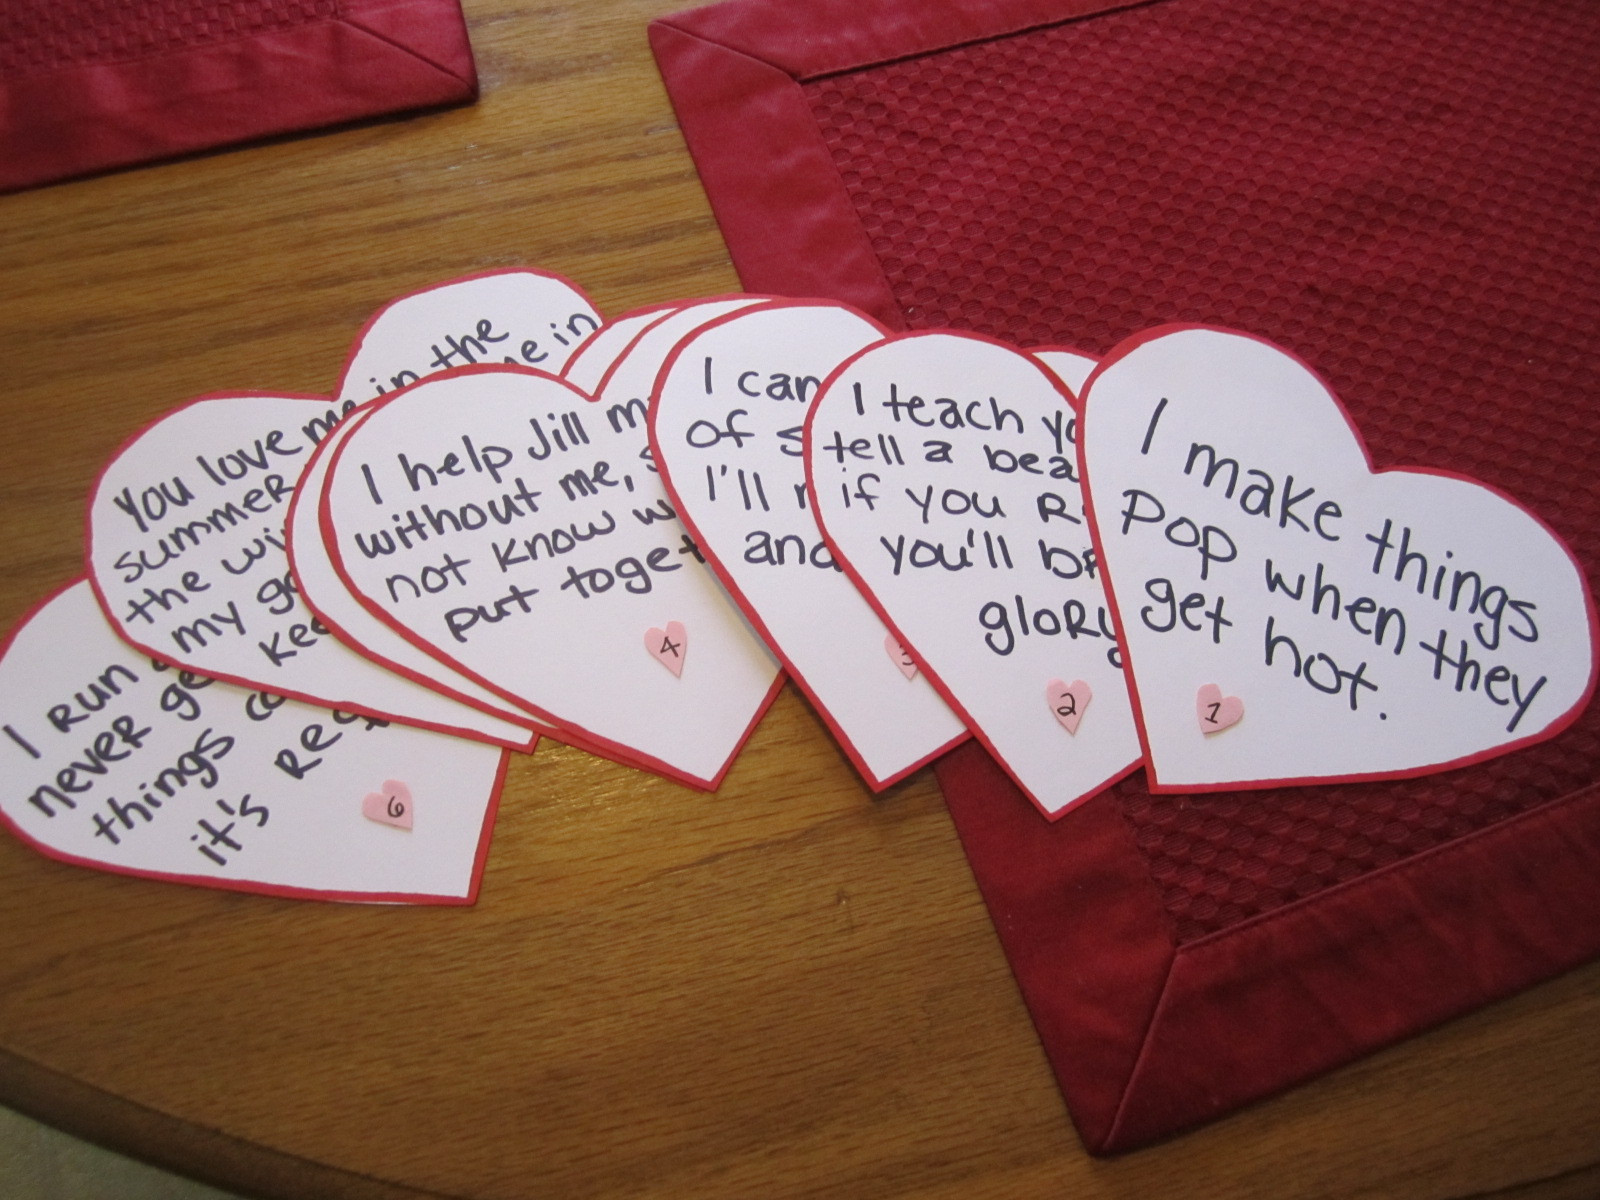 Homemade Gift Ideas For Boyfriend
 Ten DIY Valentine’s Day Gifts for him and her